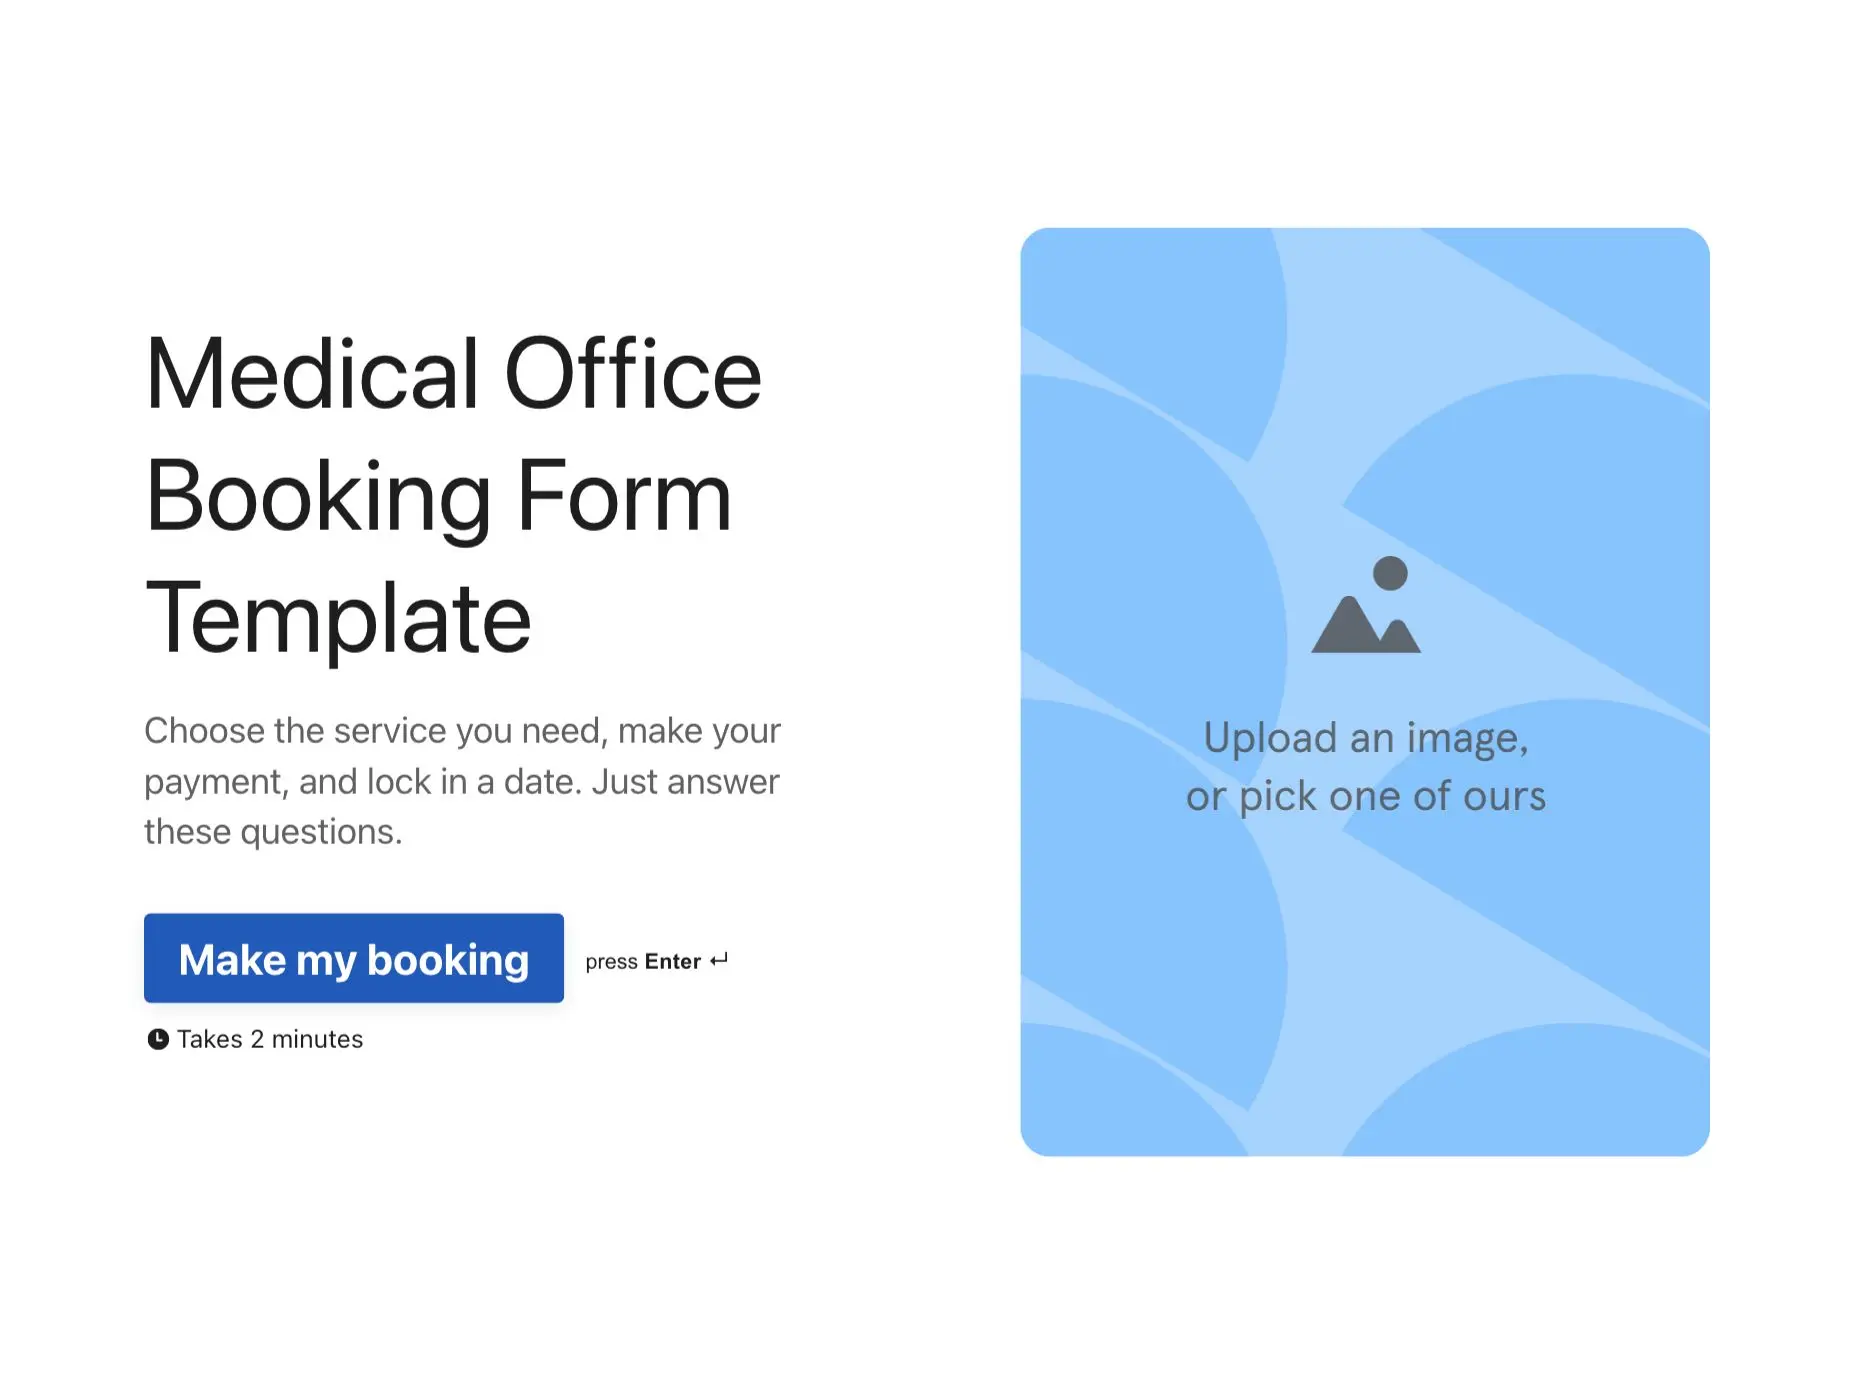 Medical Office Booking Form Template Hero